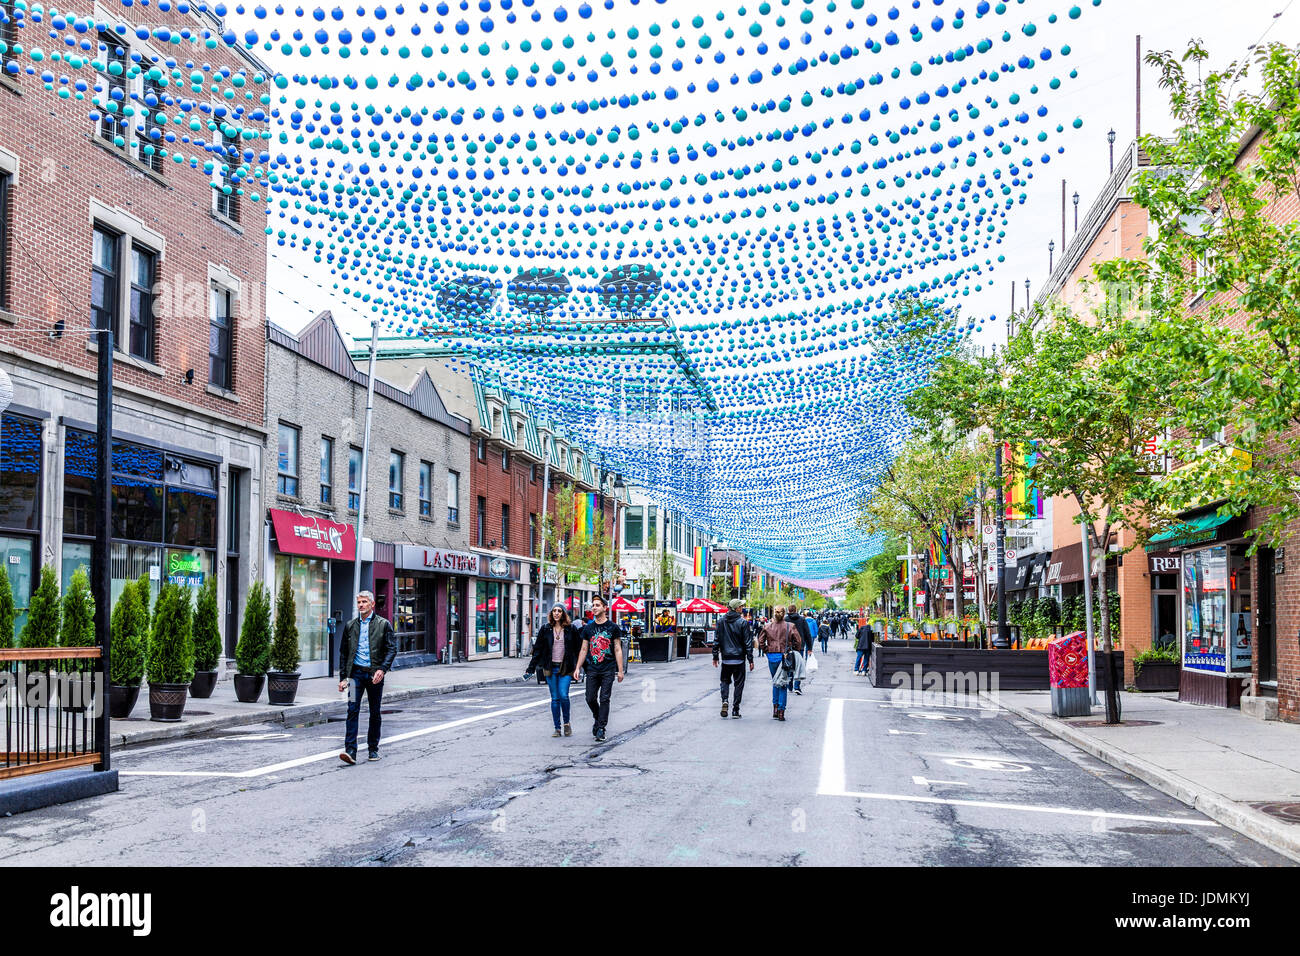 Montreal, Canada - May 26, 2017: People walking on Sainte Catherine street in Montreal's Gay Village in Quebec region with hanging decorations Stock Photo